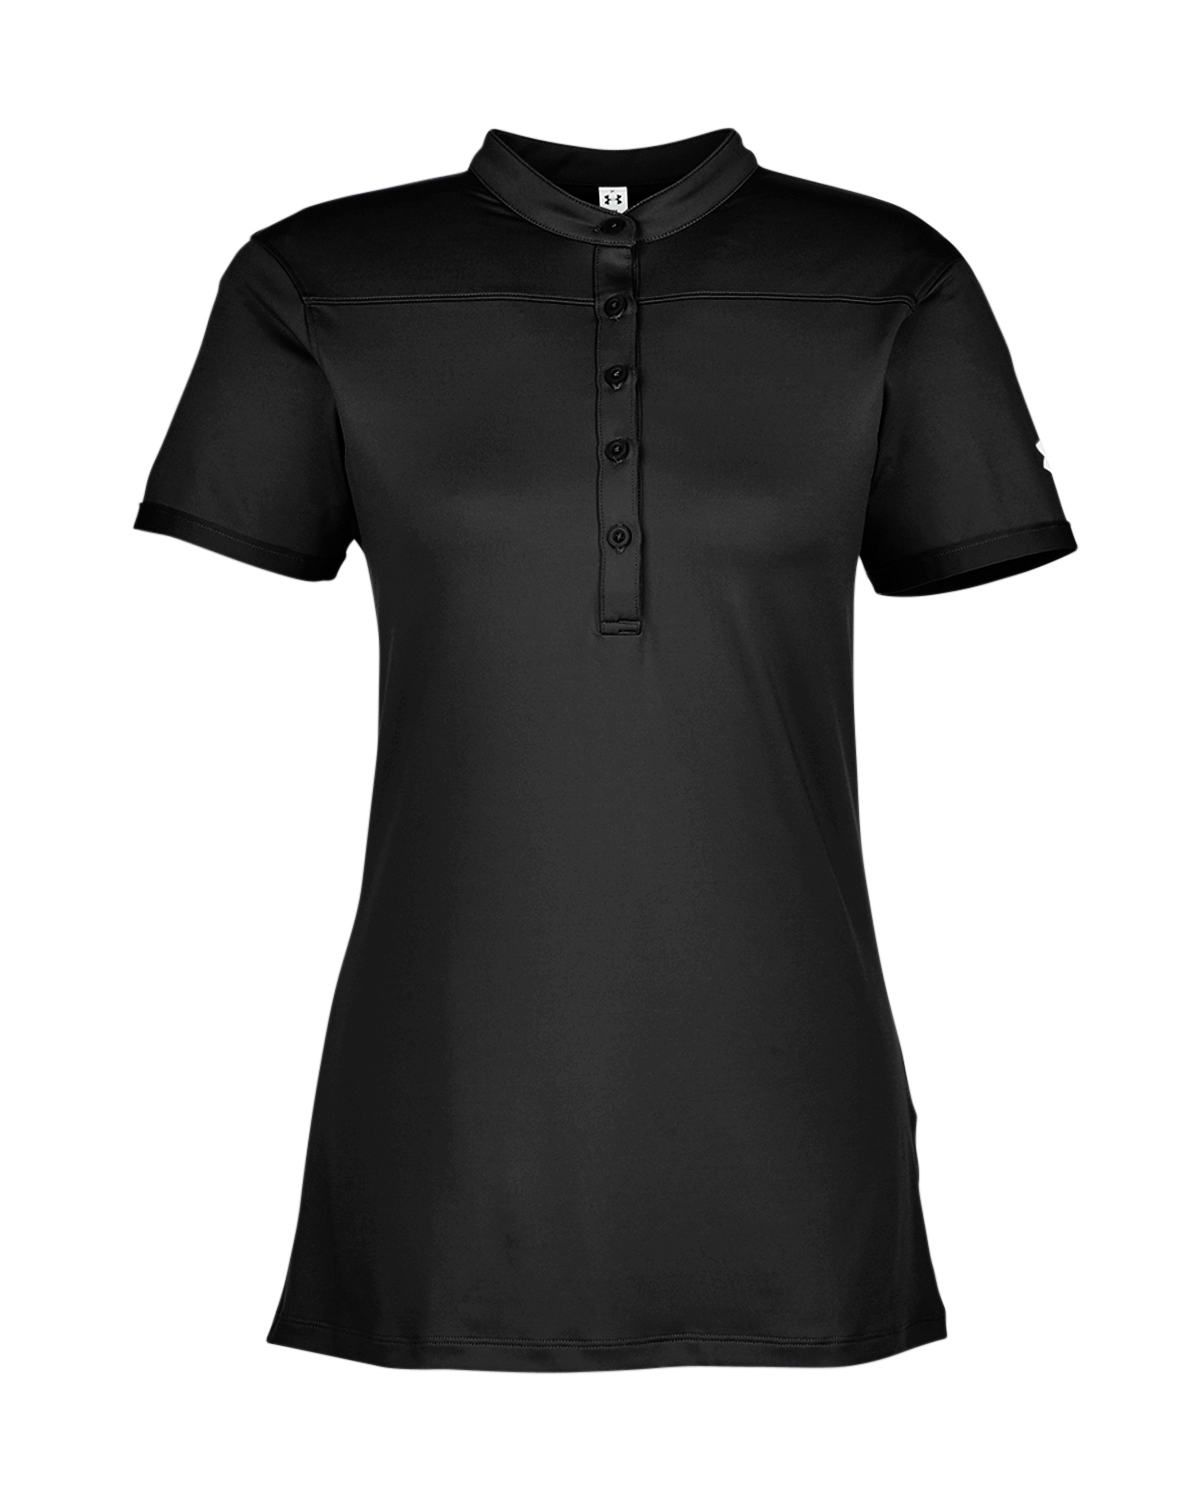 Under Armour 1317218 - Ladies' Corporate Performance Polo 2.0